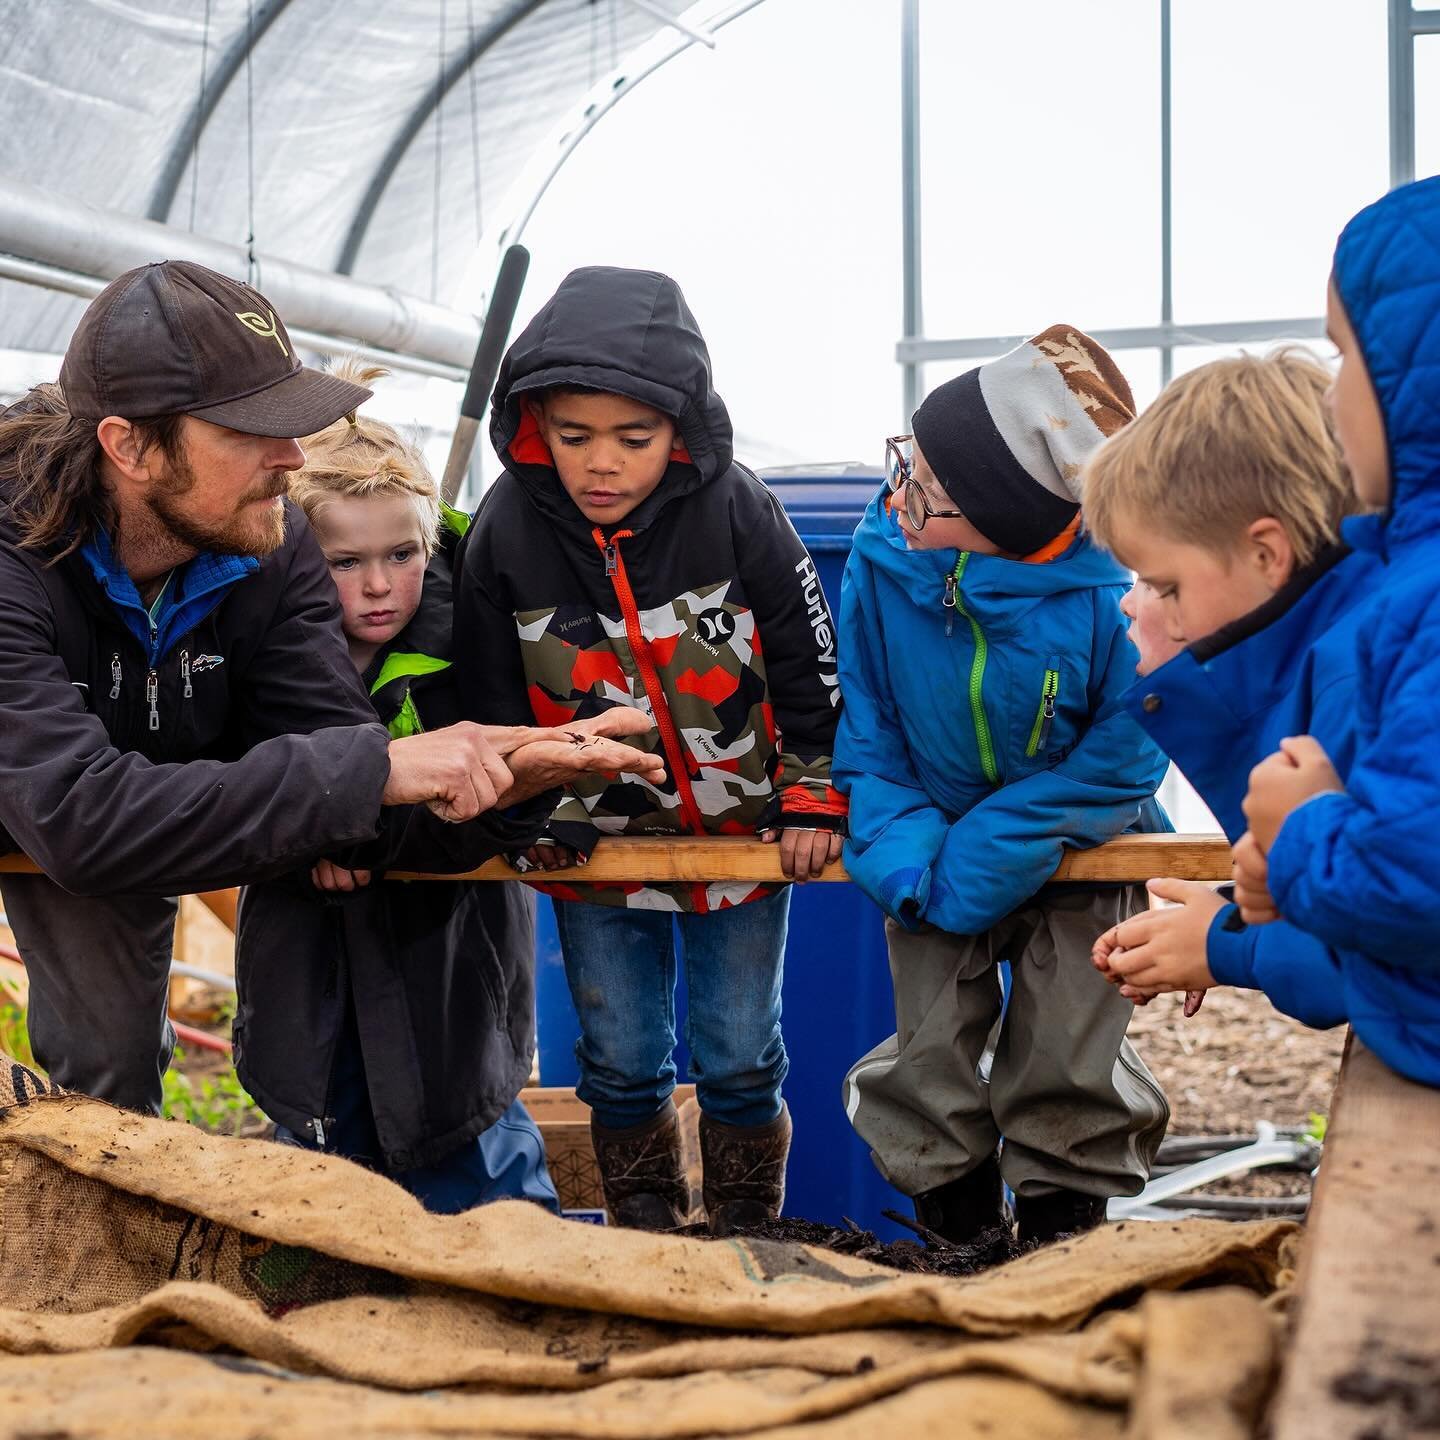 We love giving tours of our facility to future generations of composters and introducing them to our hard working worms🪱🪱! Every bit of education goes a long way towards a greener planet and healthier soil 🌱

Have a group that would enjoy an insid